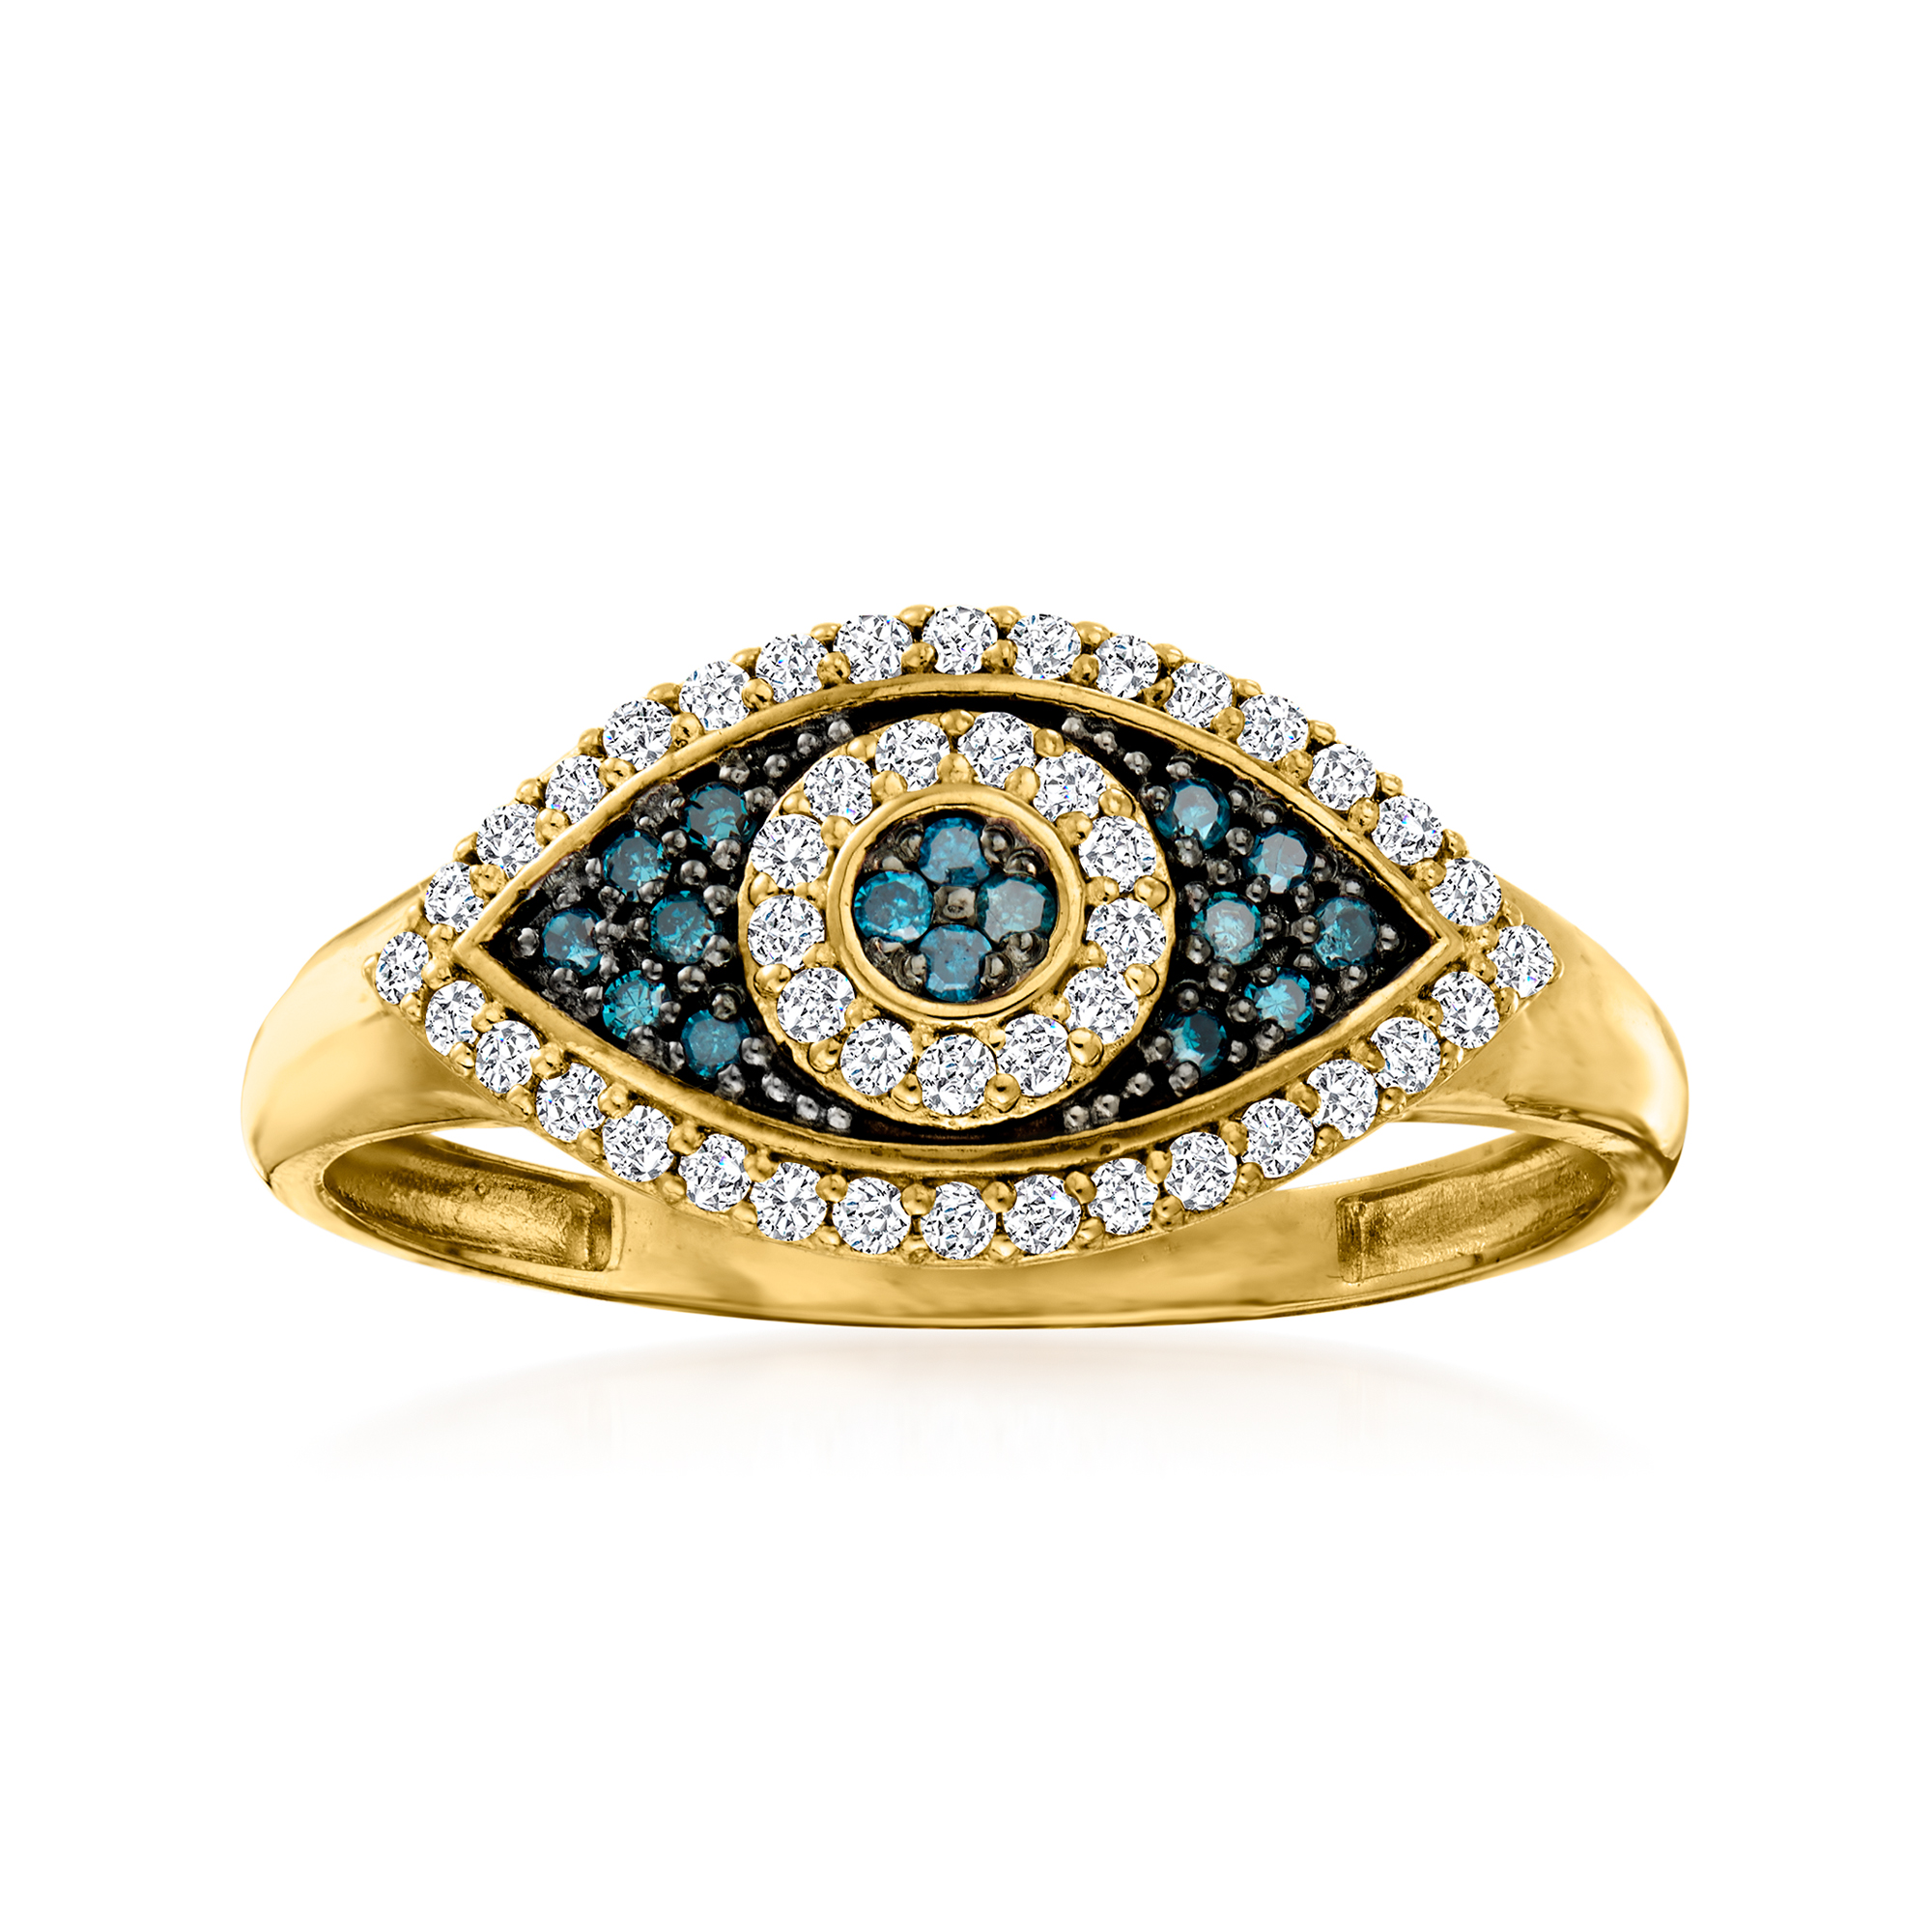 30 ct. t.w. Blue and White Diamond Evil Eye Ring in 14kt Yellow Gold |  Ross-Simons